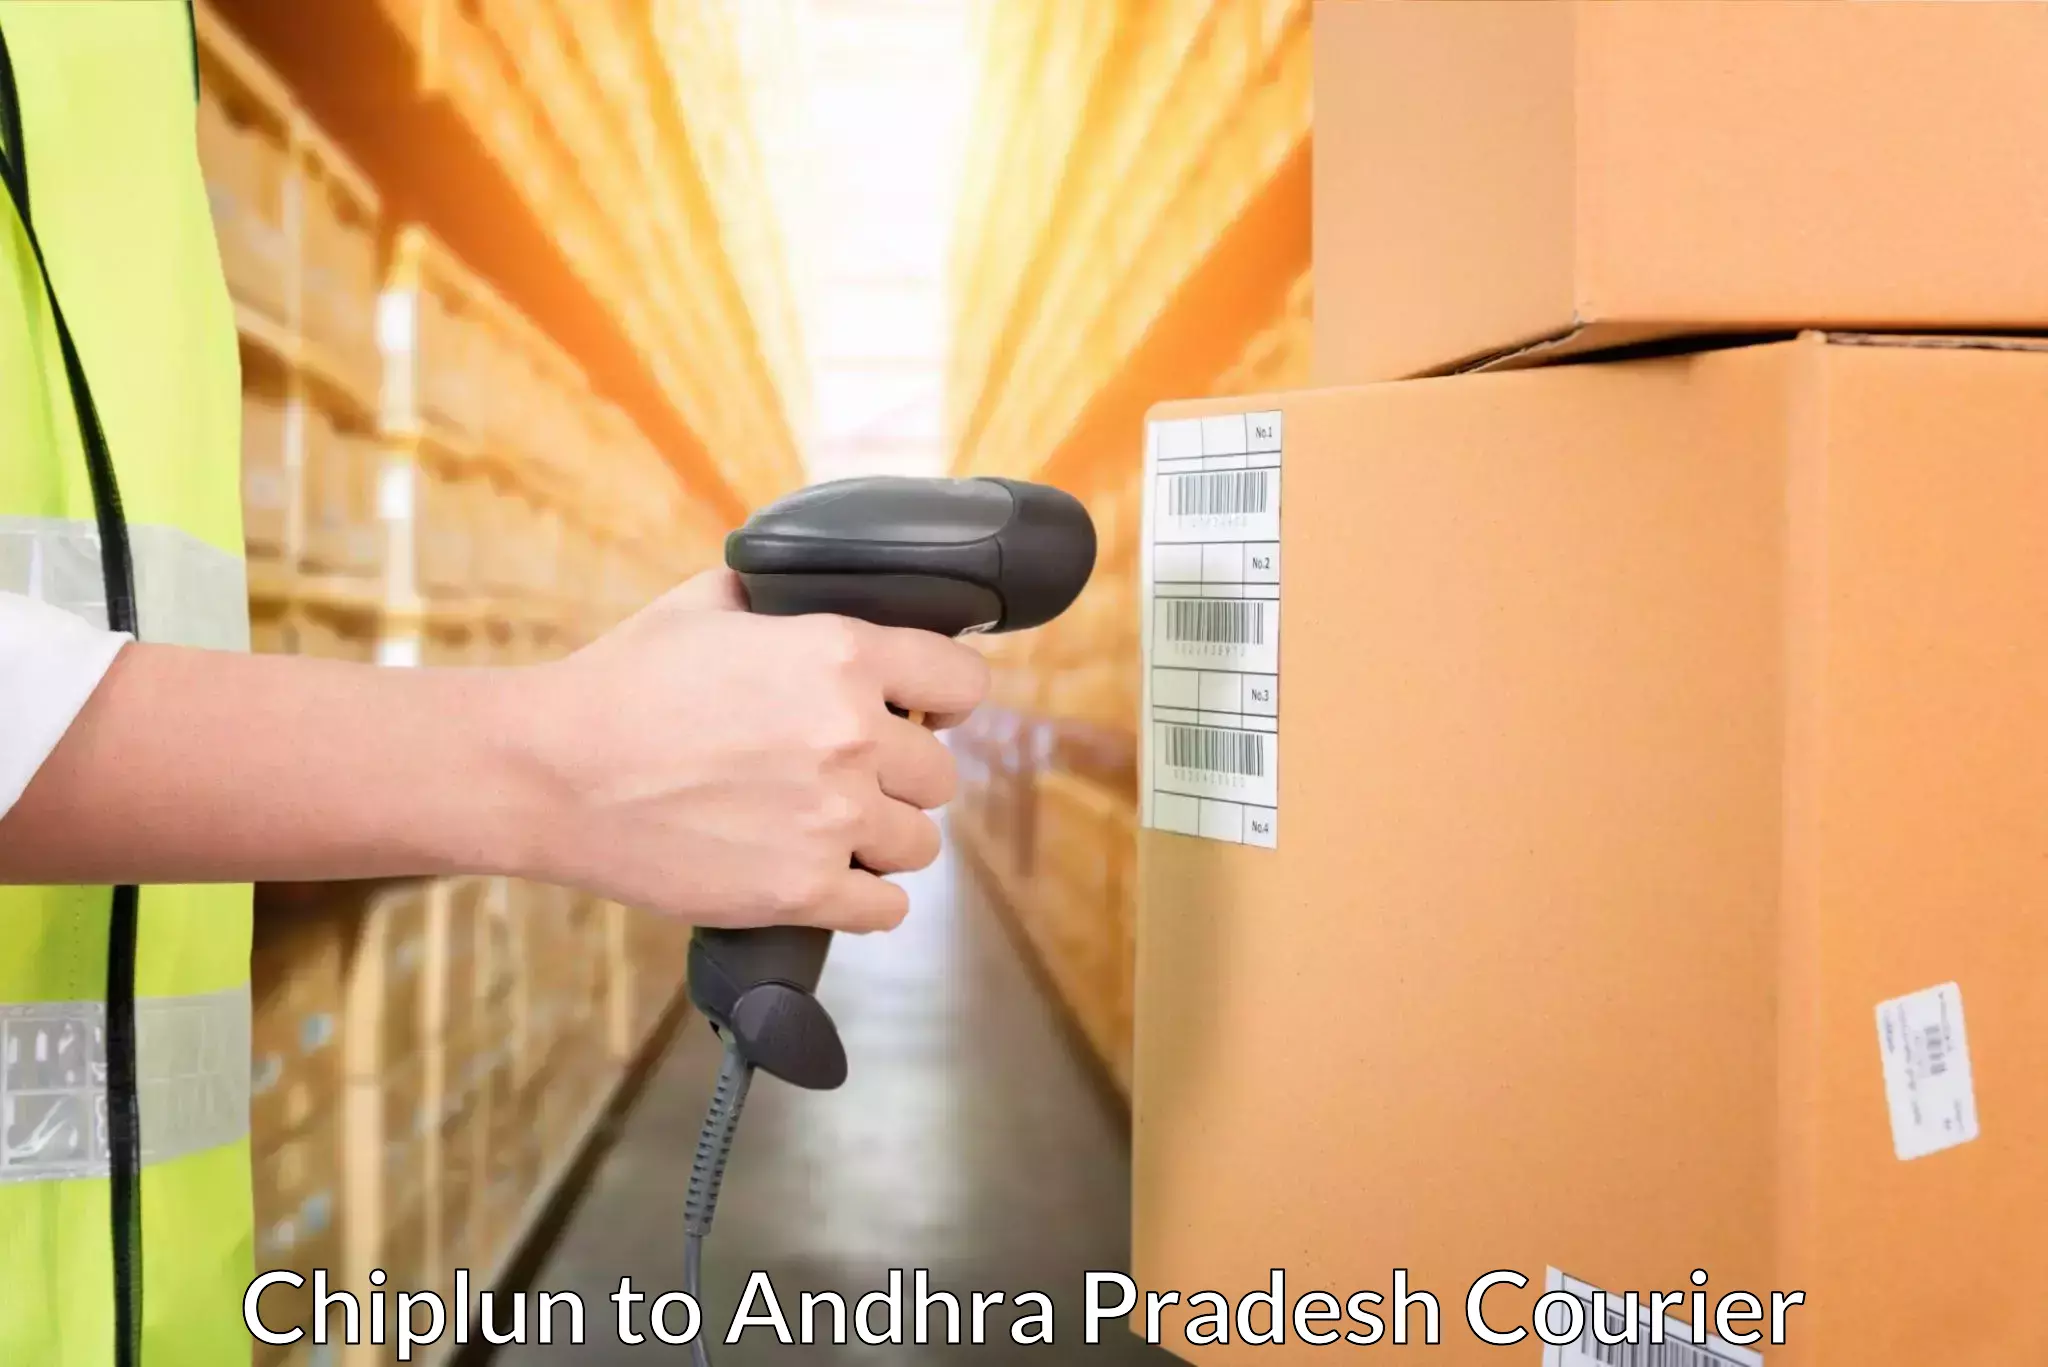 Sustainable shipping practices Chiplun to Andhra Pradesh